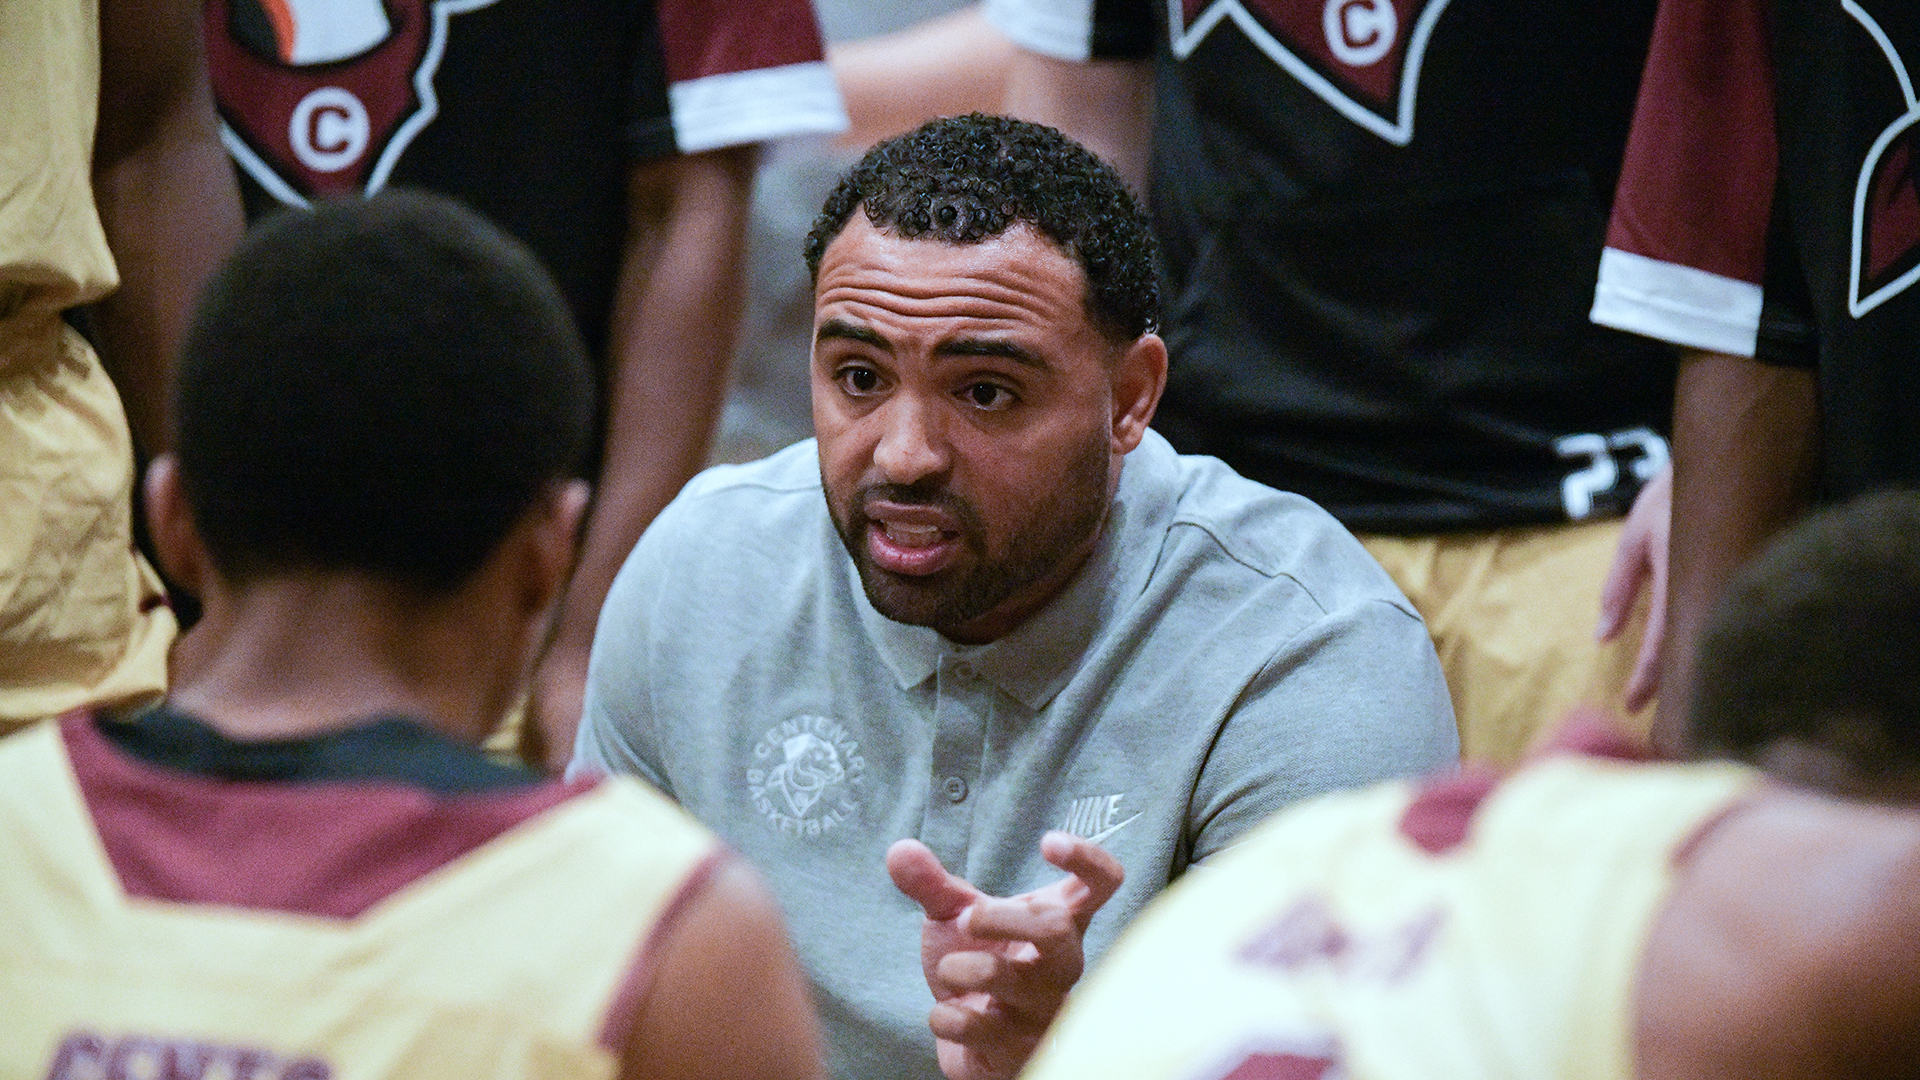 Centenary head coach Chris Dorsey recorded win number 75 with the Gents on Friday night.